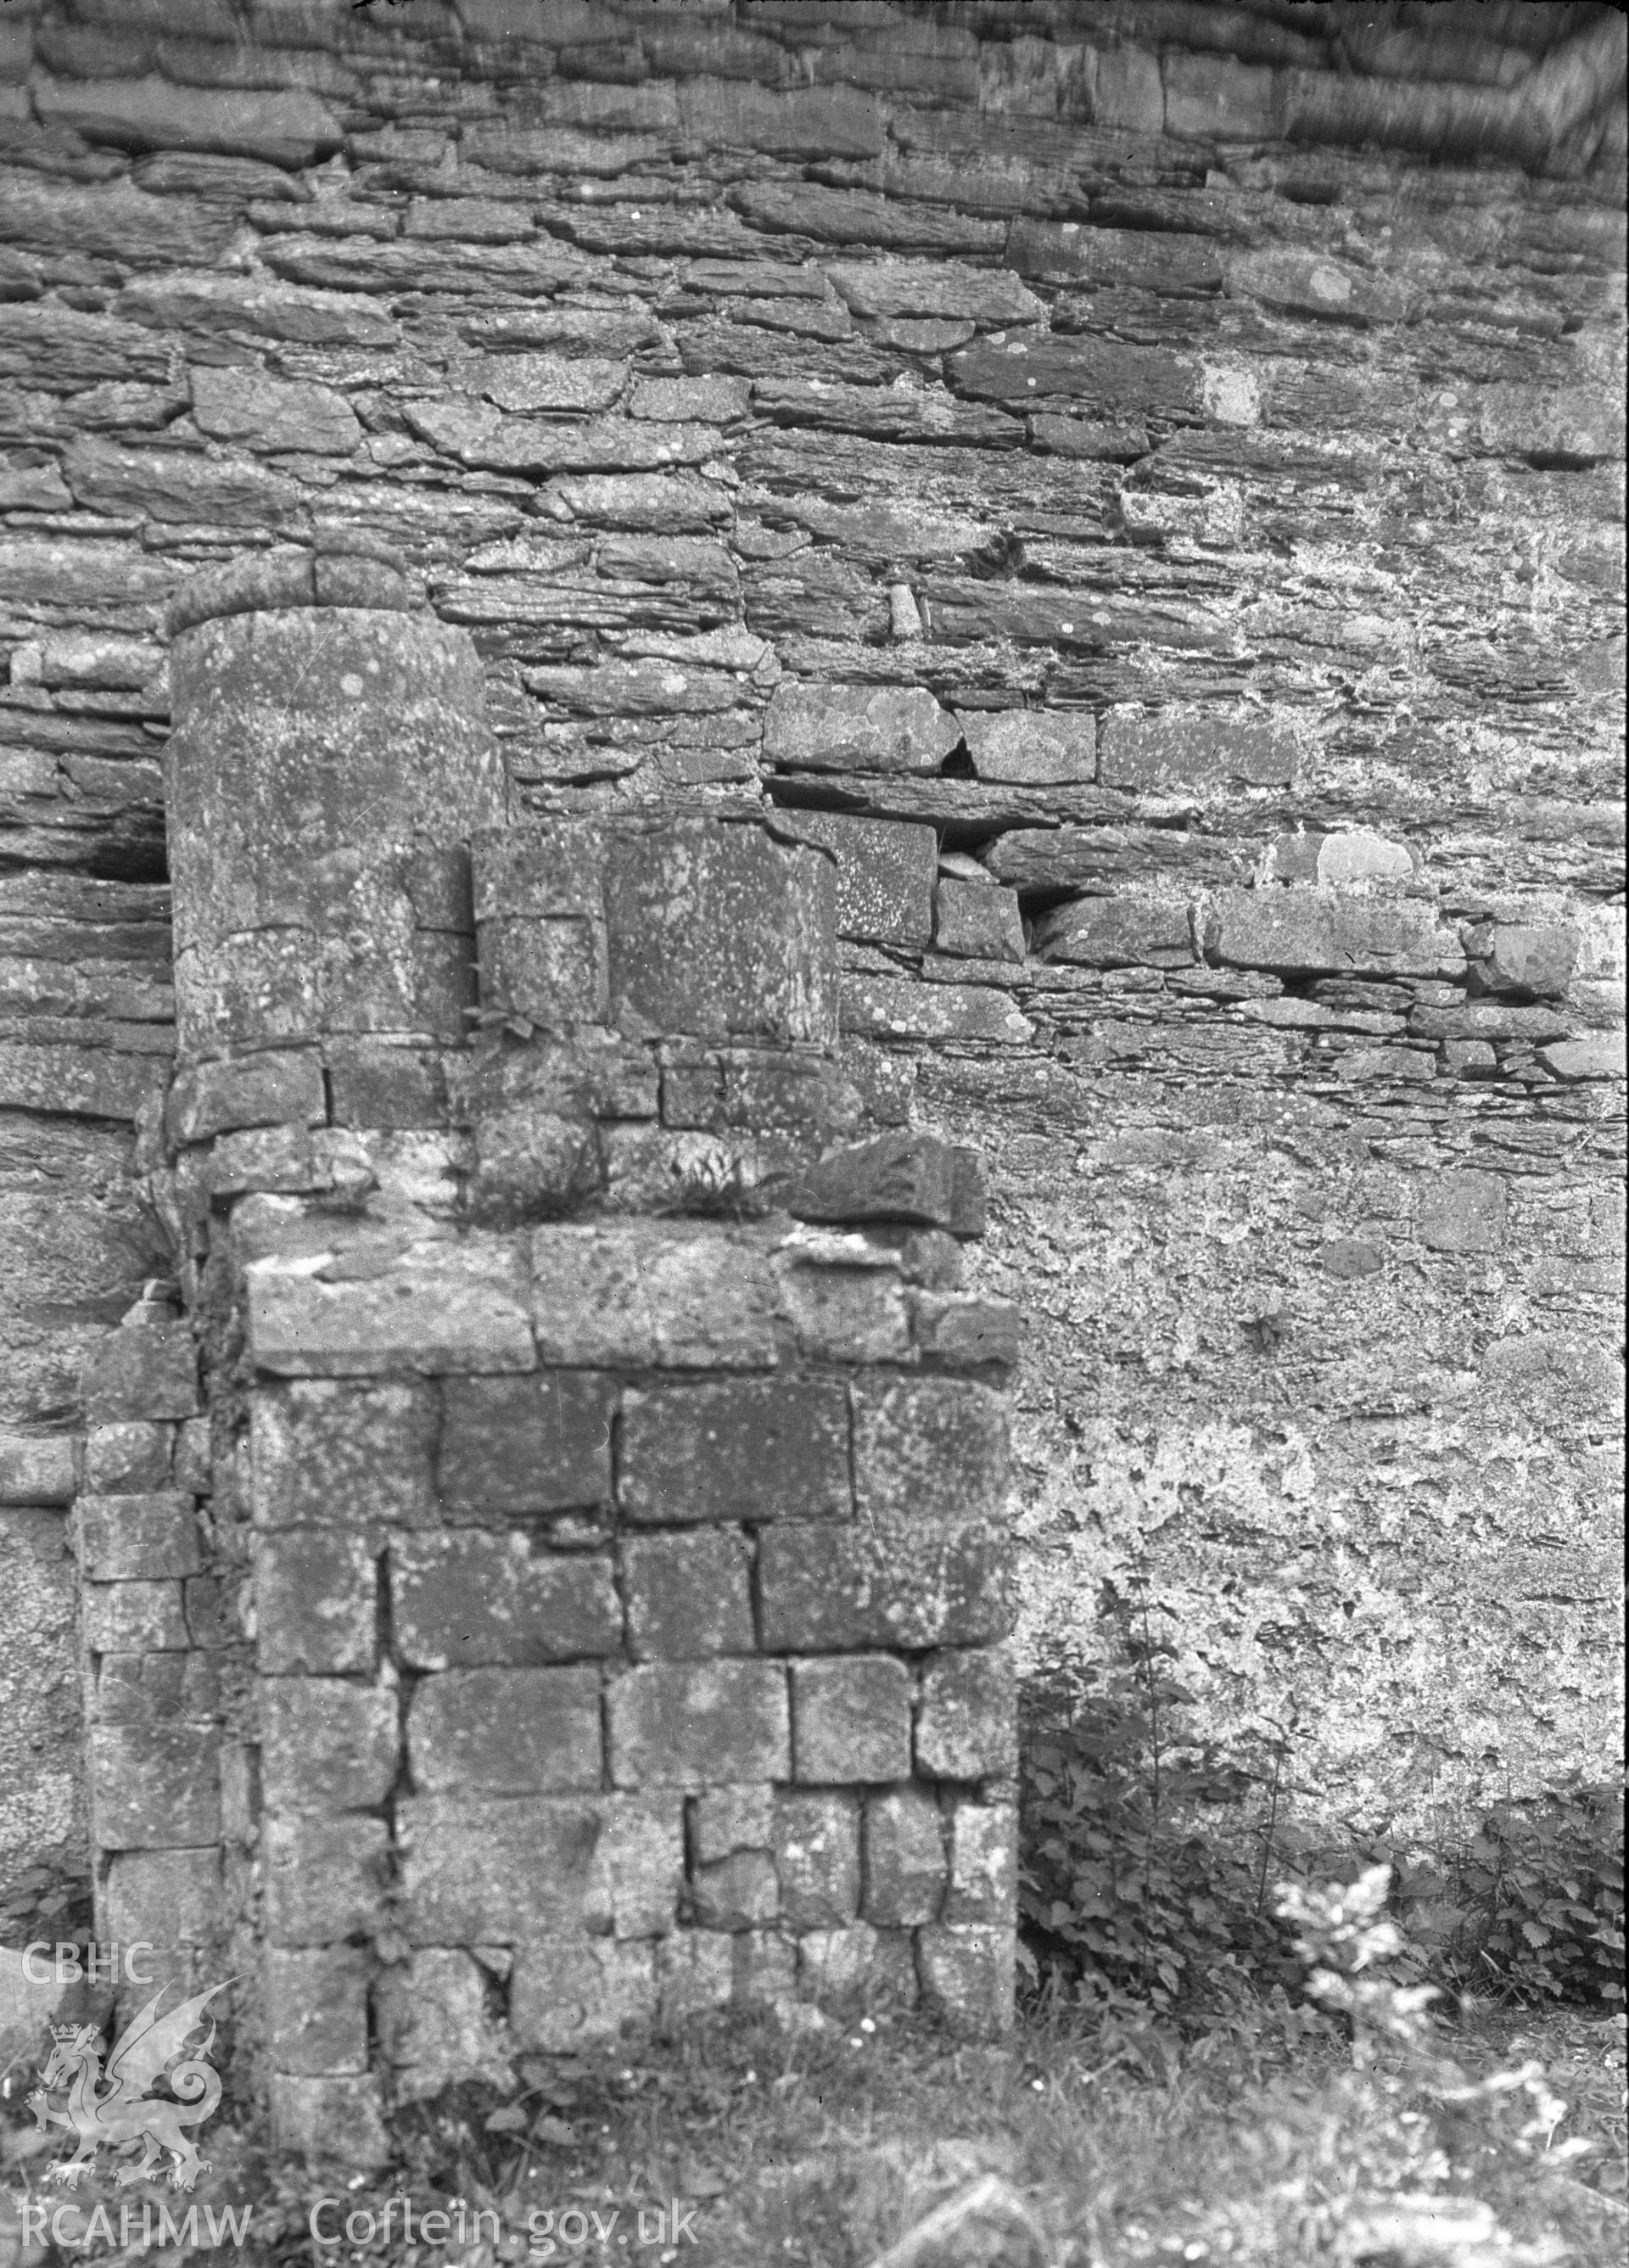 Digital copy of a view of Strata Florida Abbey taken in 1934 by D.O.E.